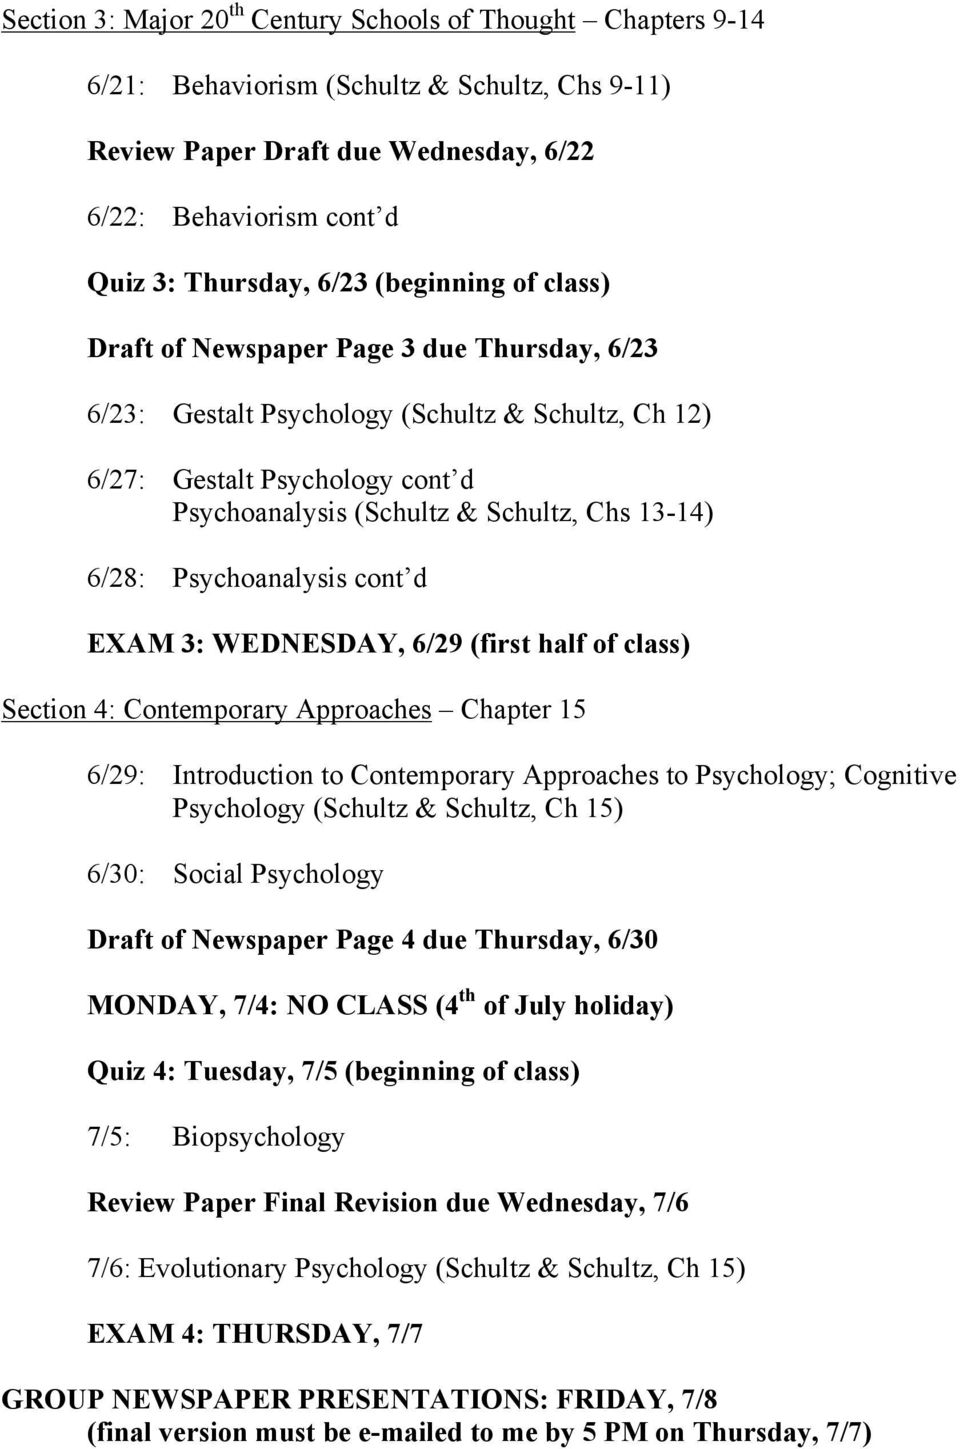 6/28: Psychoanalysis cont d EXAM 3: WEDNESDAY, 6/29 (first half of class) Section 4: Contemporary Approaches Chapter 15 6/29: Introduction to Contemporary Approaches to Psychology; Cognitive